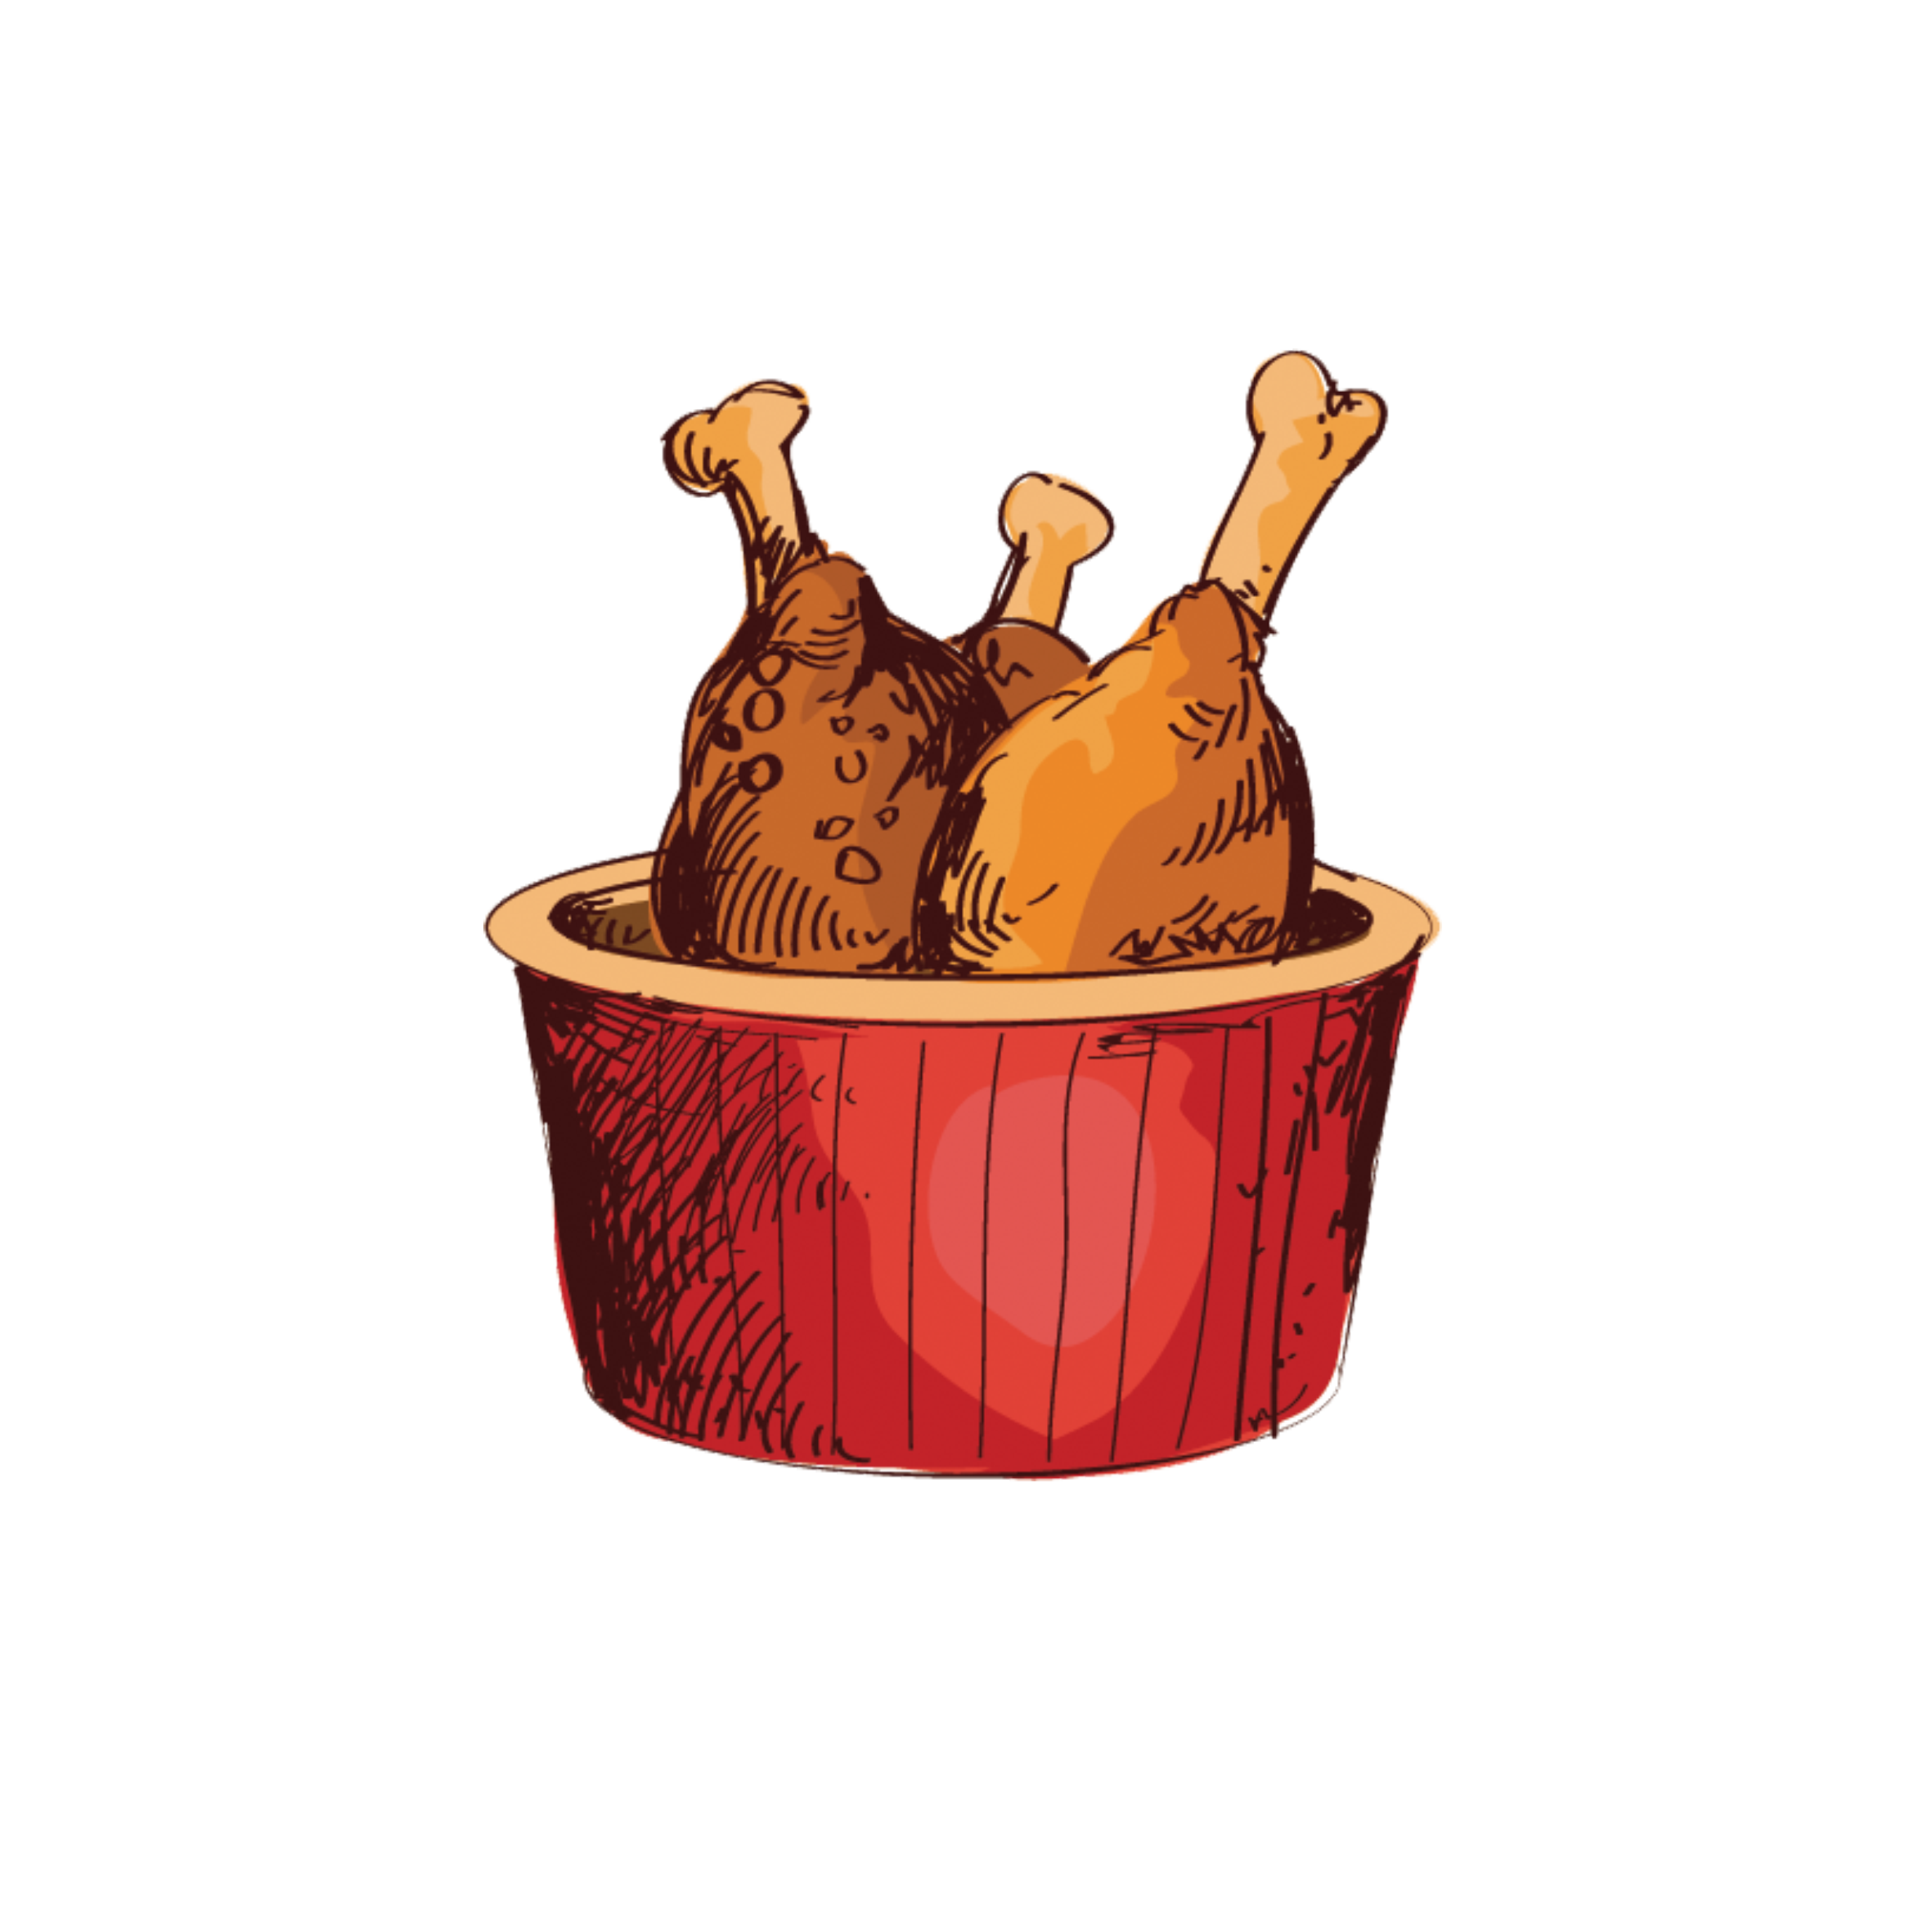 Fries clipart basket fry. Fried chicken cola french